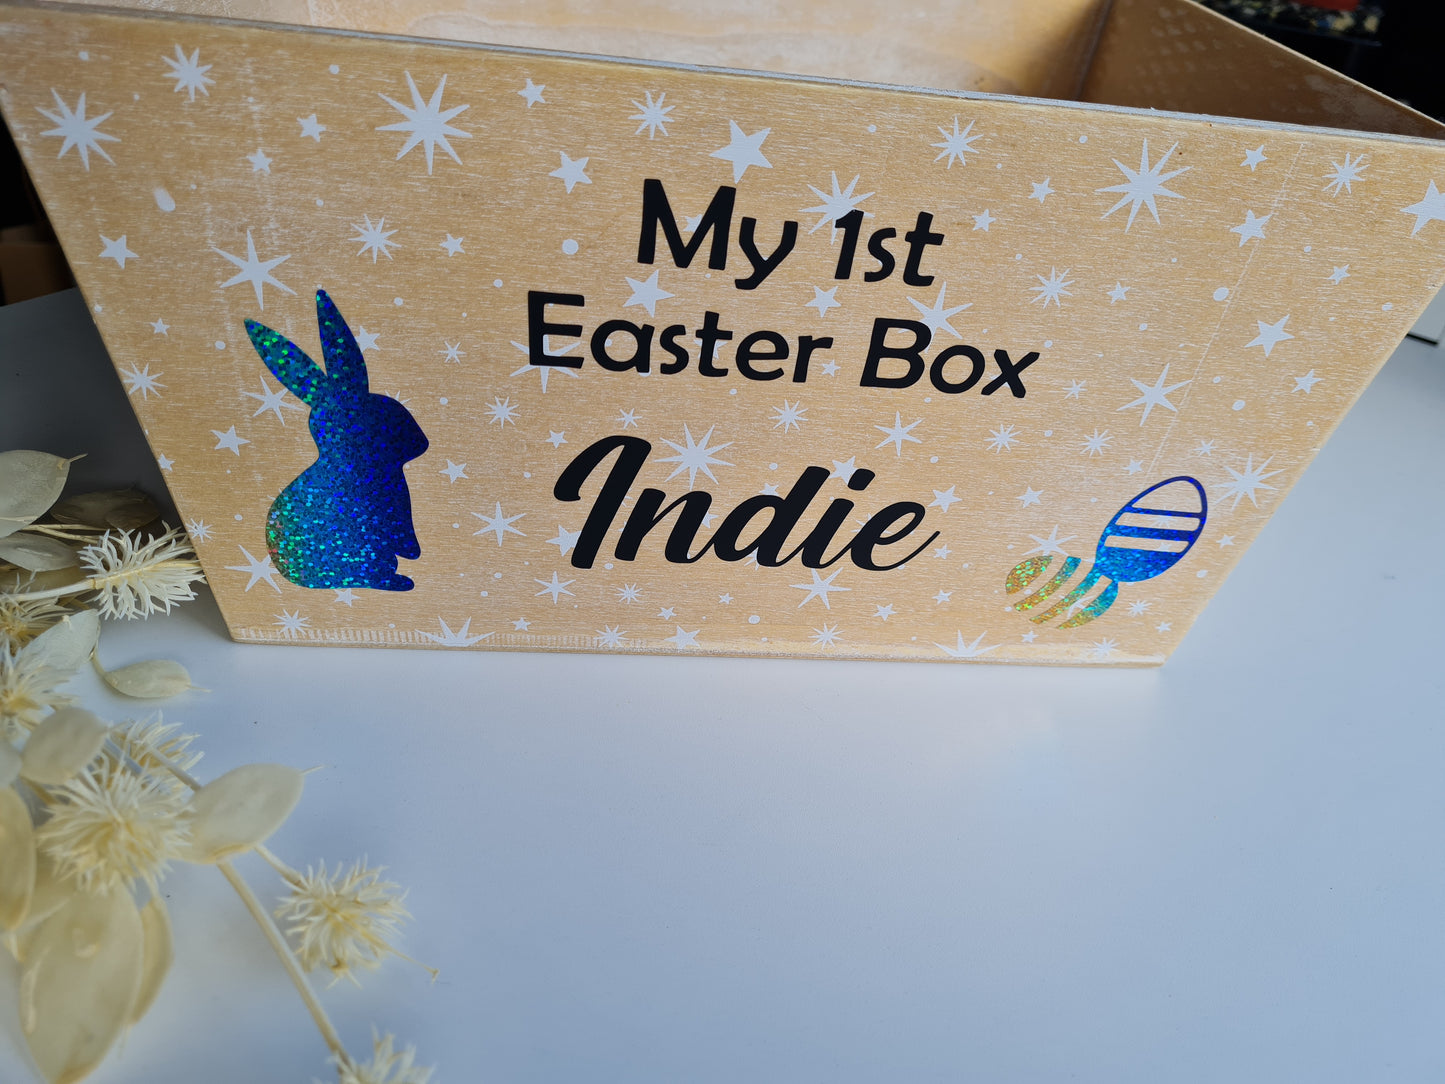 My 1st Easter Box